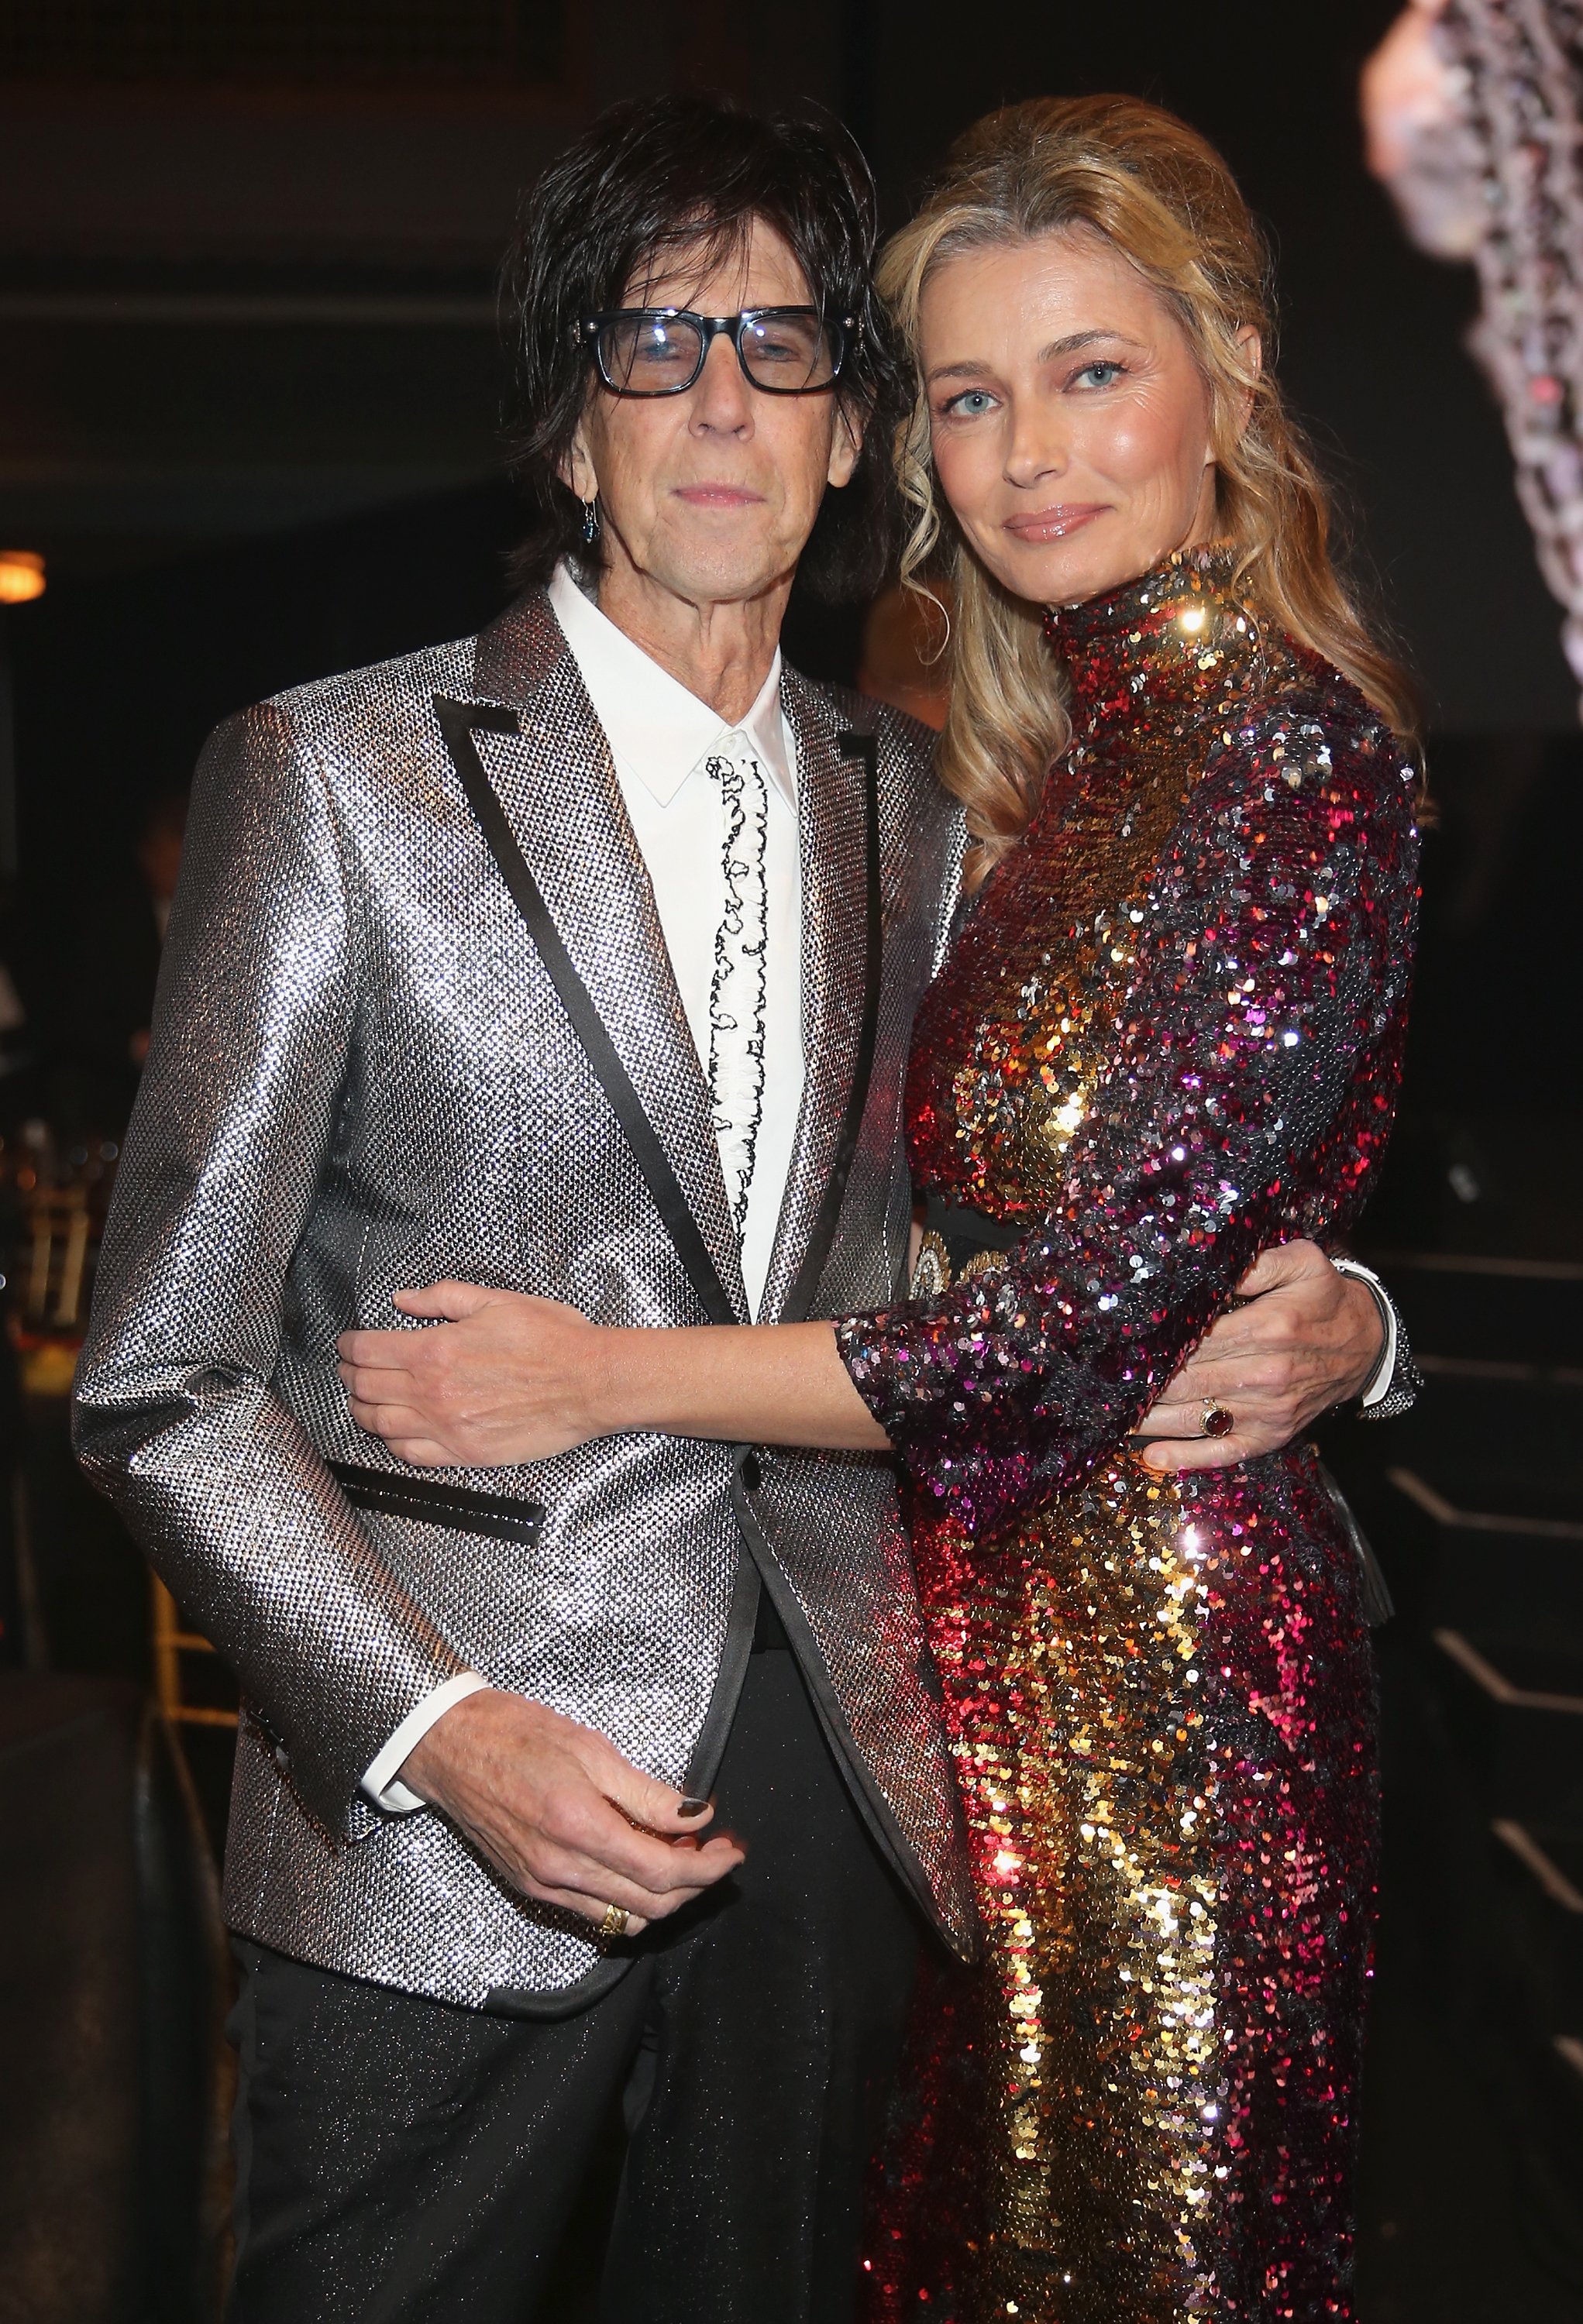 Paulina Porizkova and Ric Ocasek pictured at the 33rd Annual Rock & Roll Hall of Fame Induction Ceremony, 2018, Cleveland, Ohio. | Photo: Getty Images